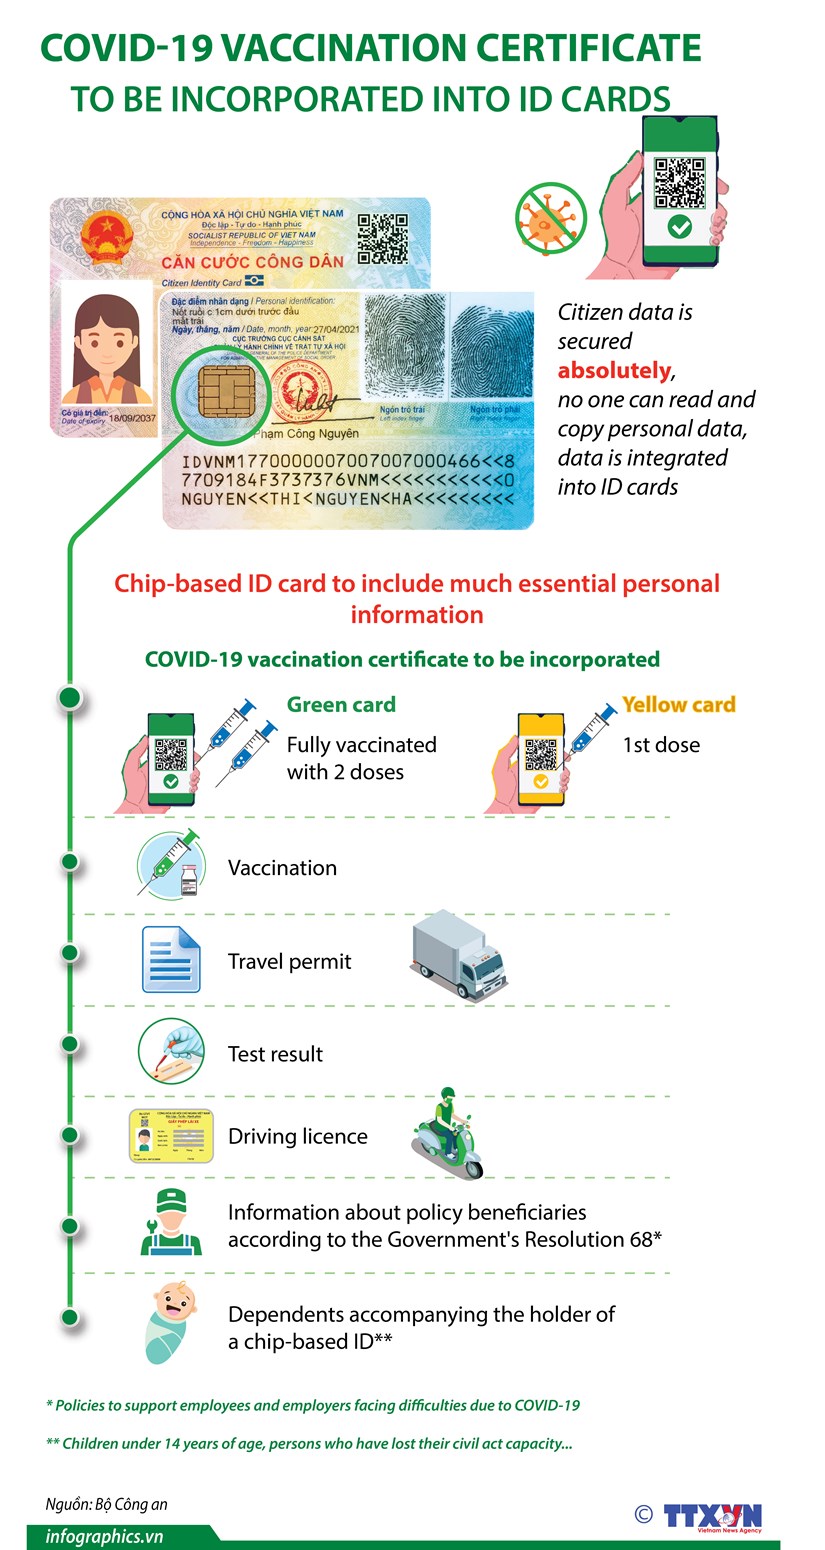 COVID-19 vaccination certificate to be incorporated into ID cards hinh anh 1